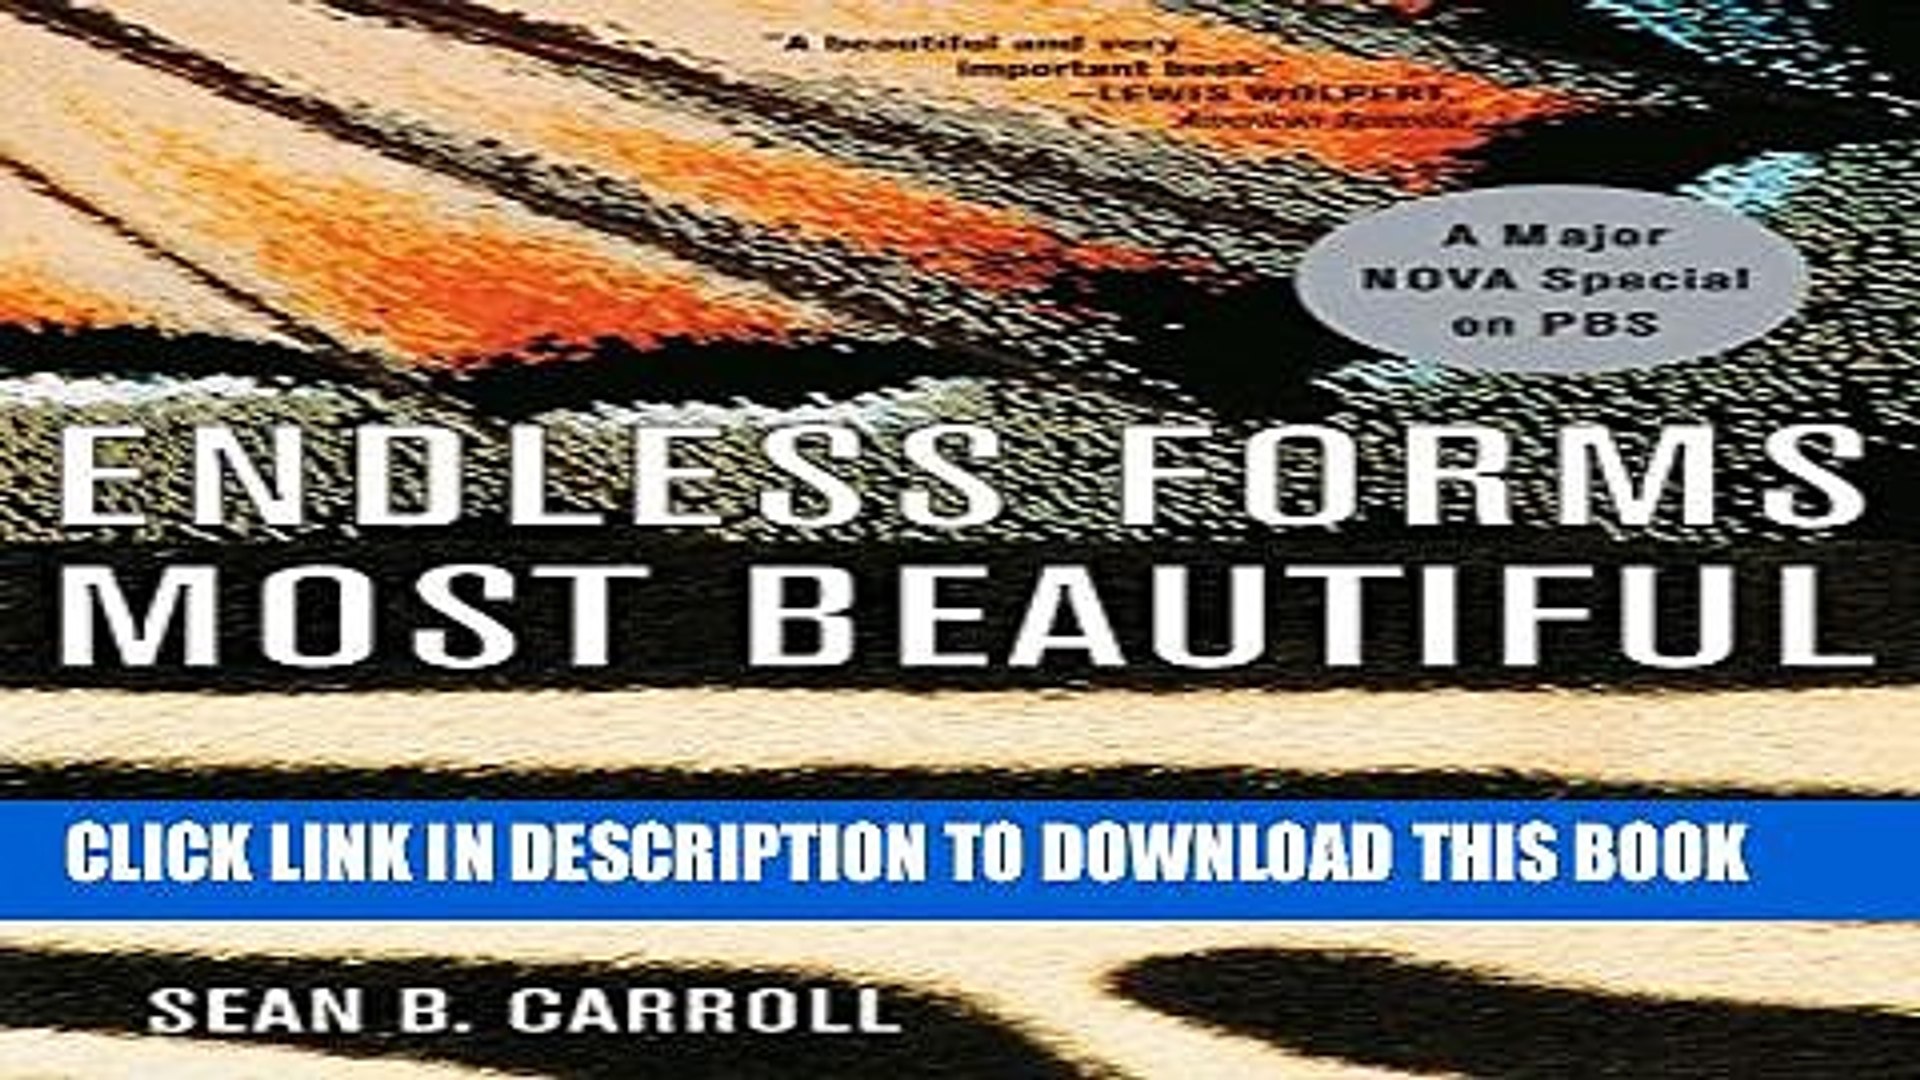 Endless forms most beautiful download album